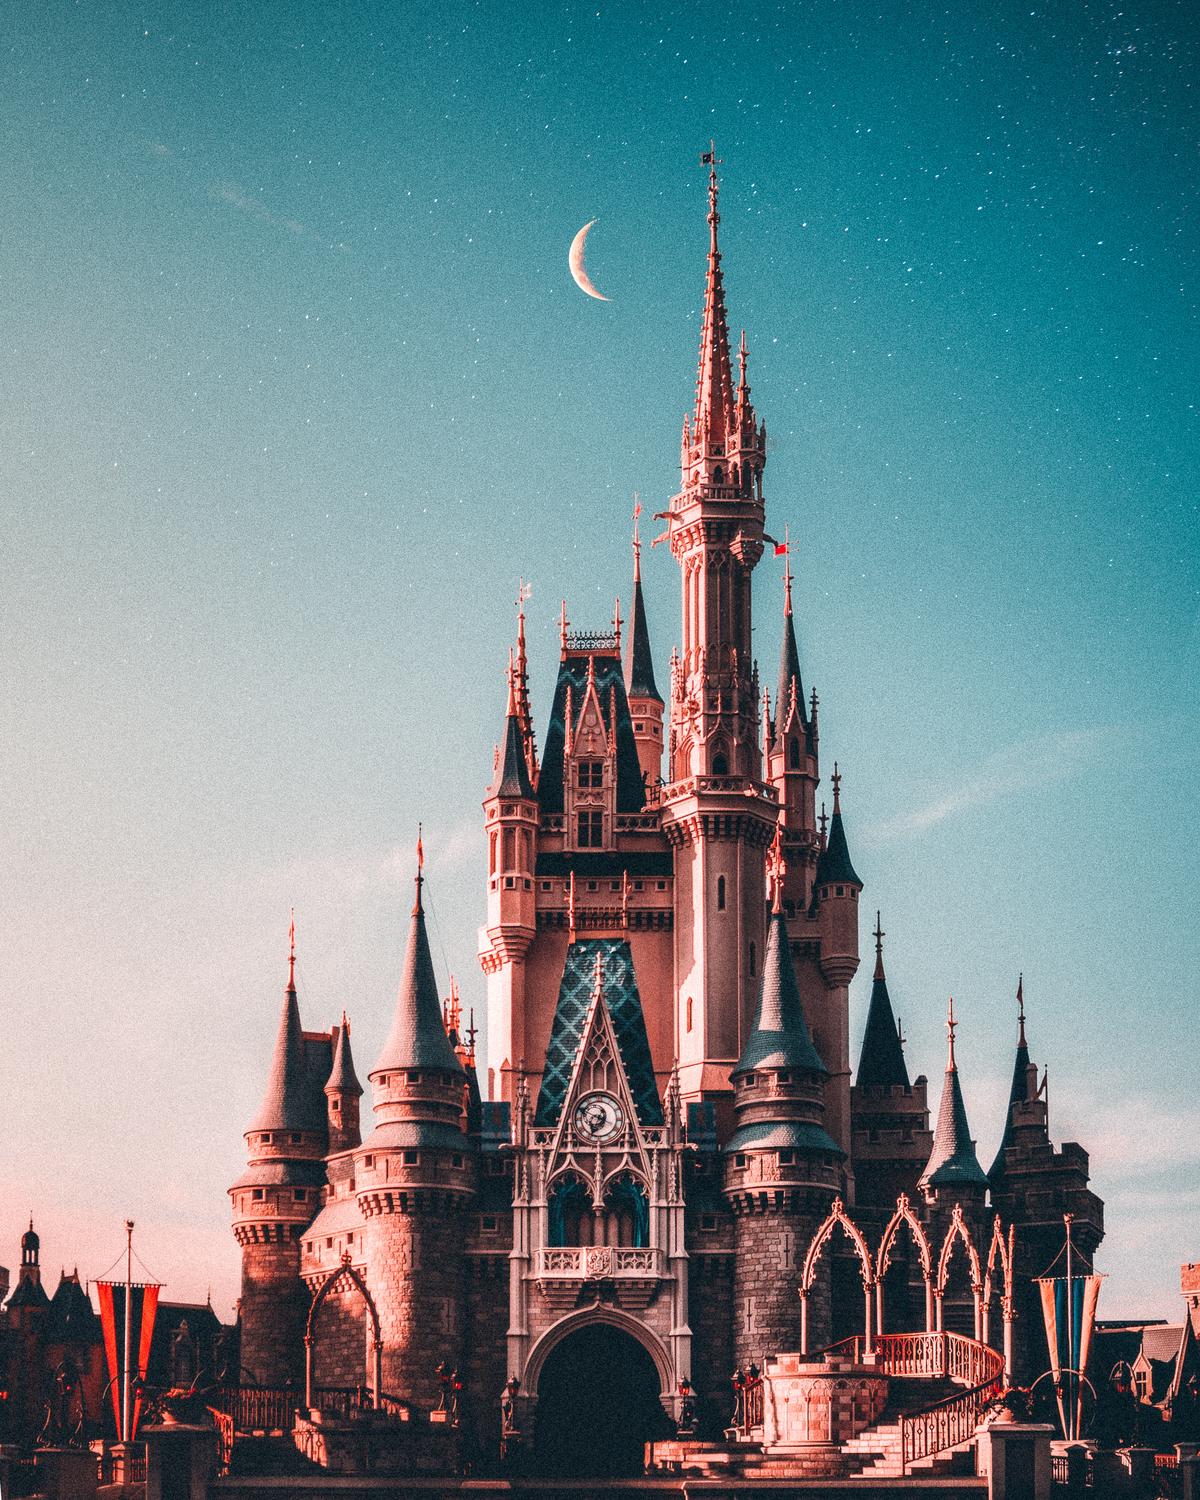 The magical world of Disney: Castles, attractions, and entertainment.